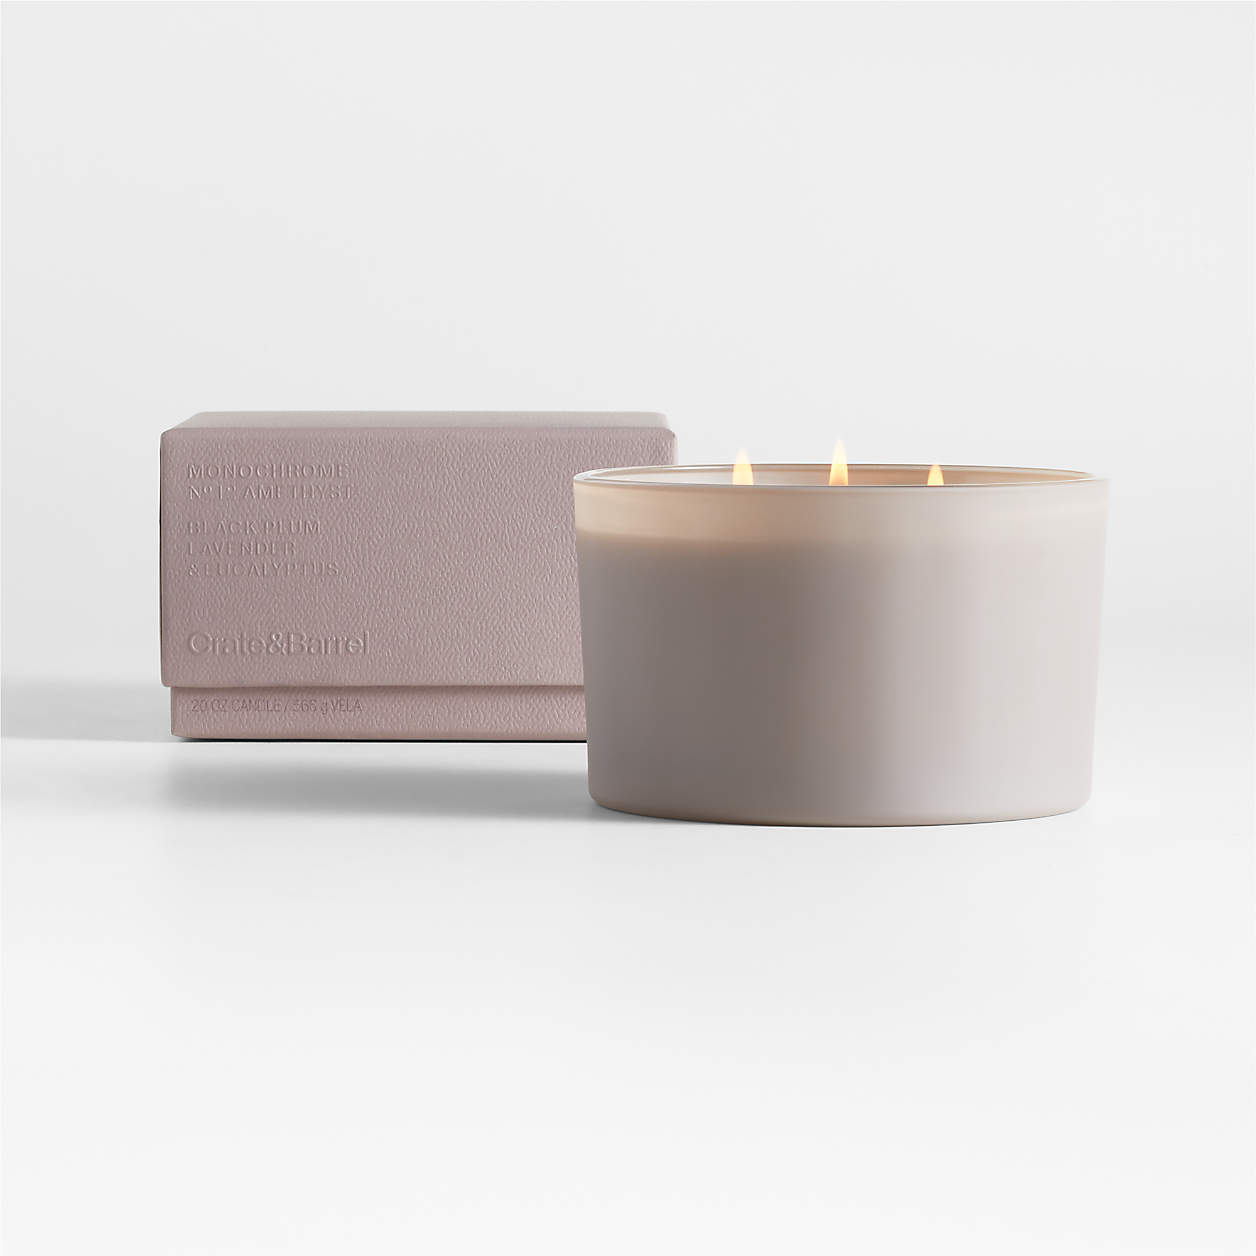 Monochrome No. 12 Amethyst 3-Wick Candle - Black Plum, Lavender and ...